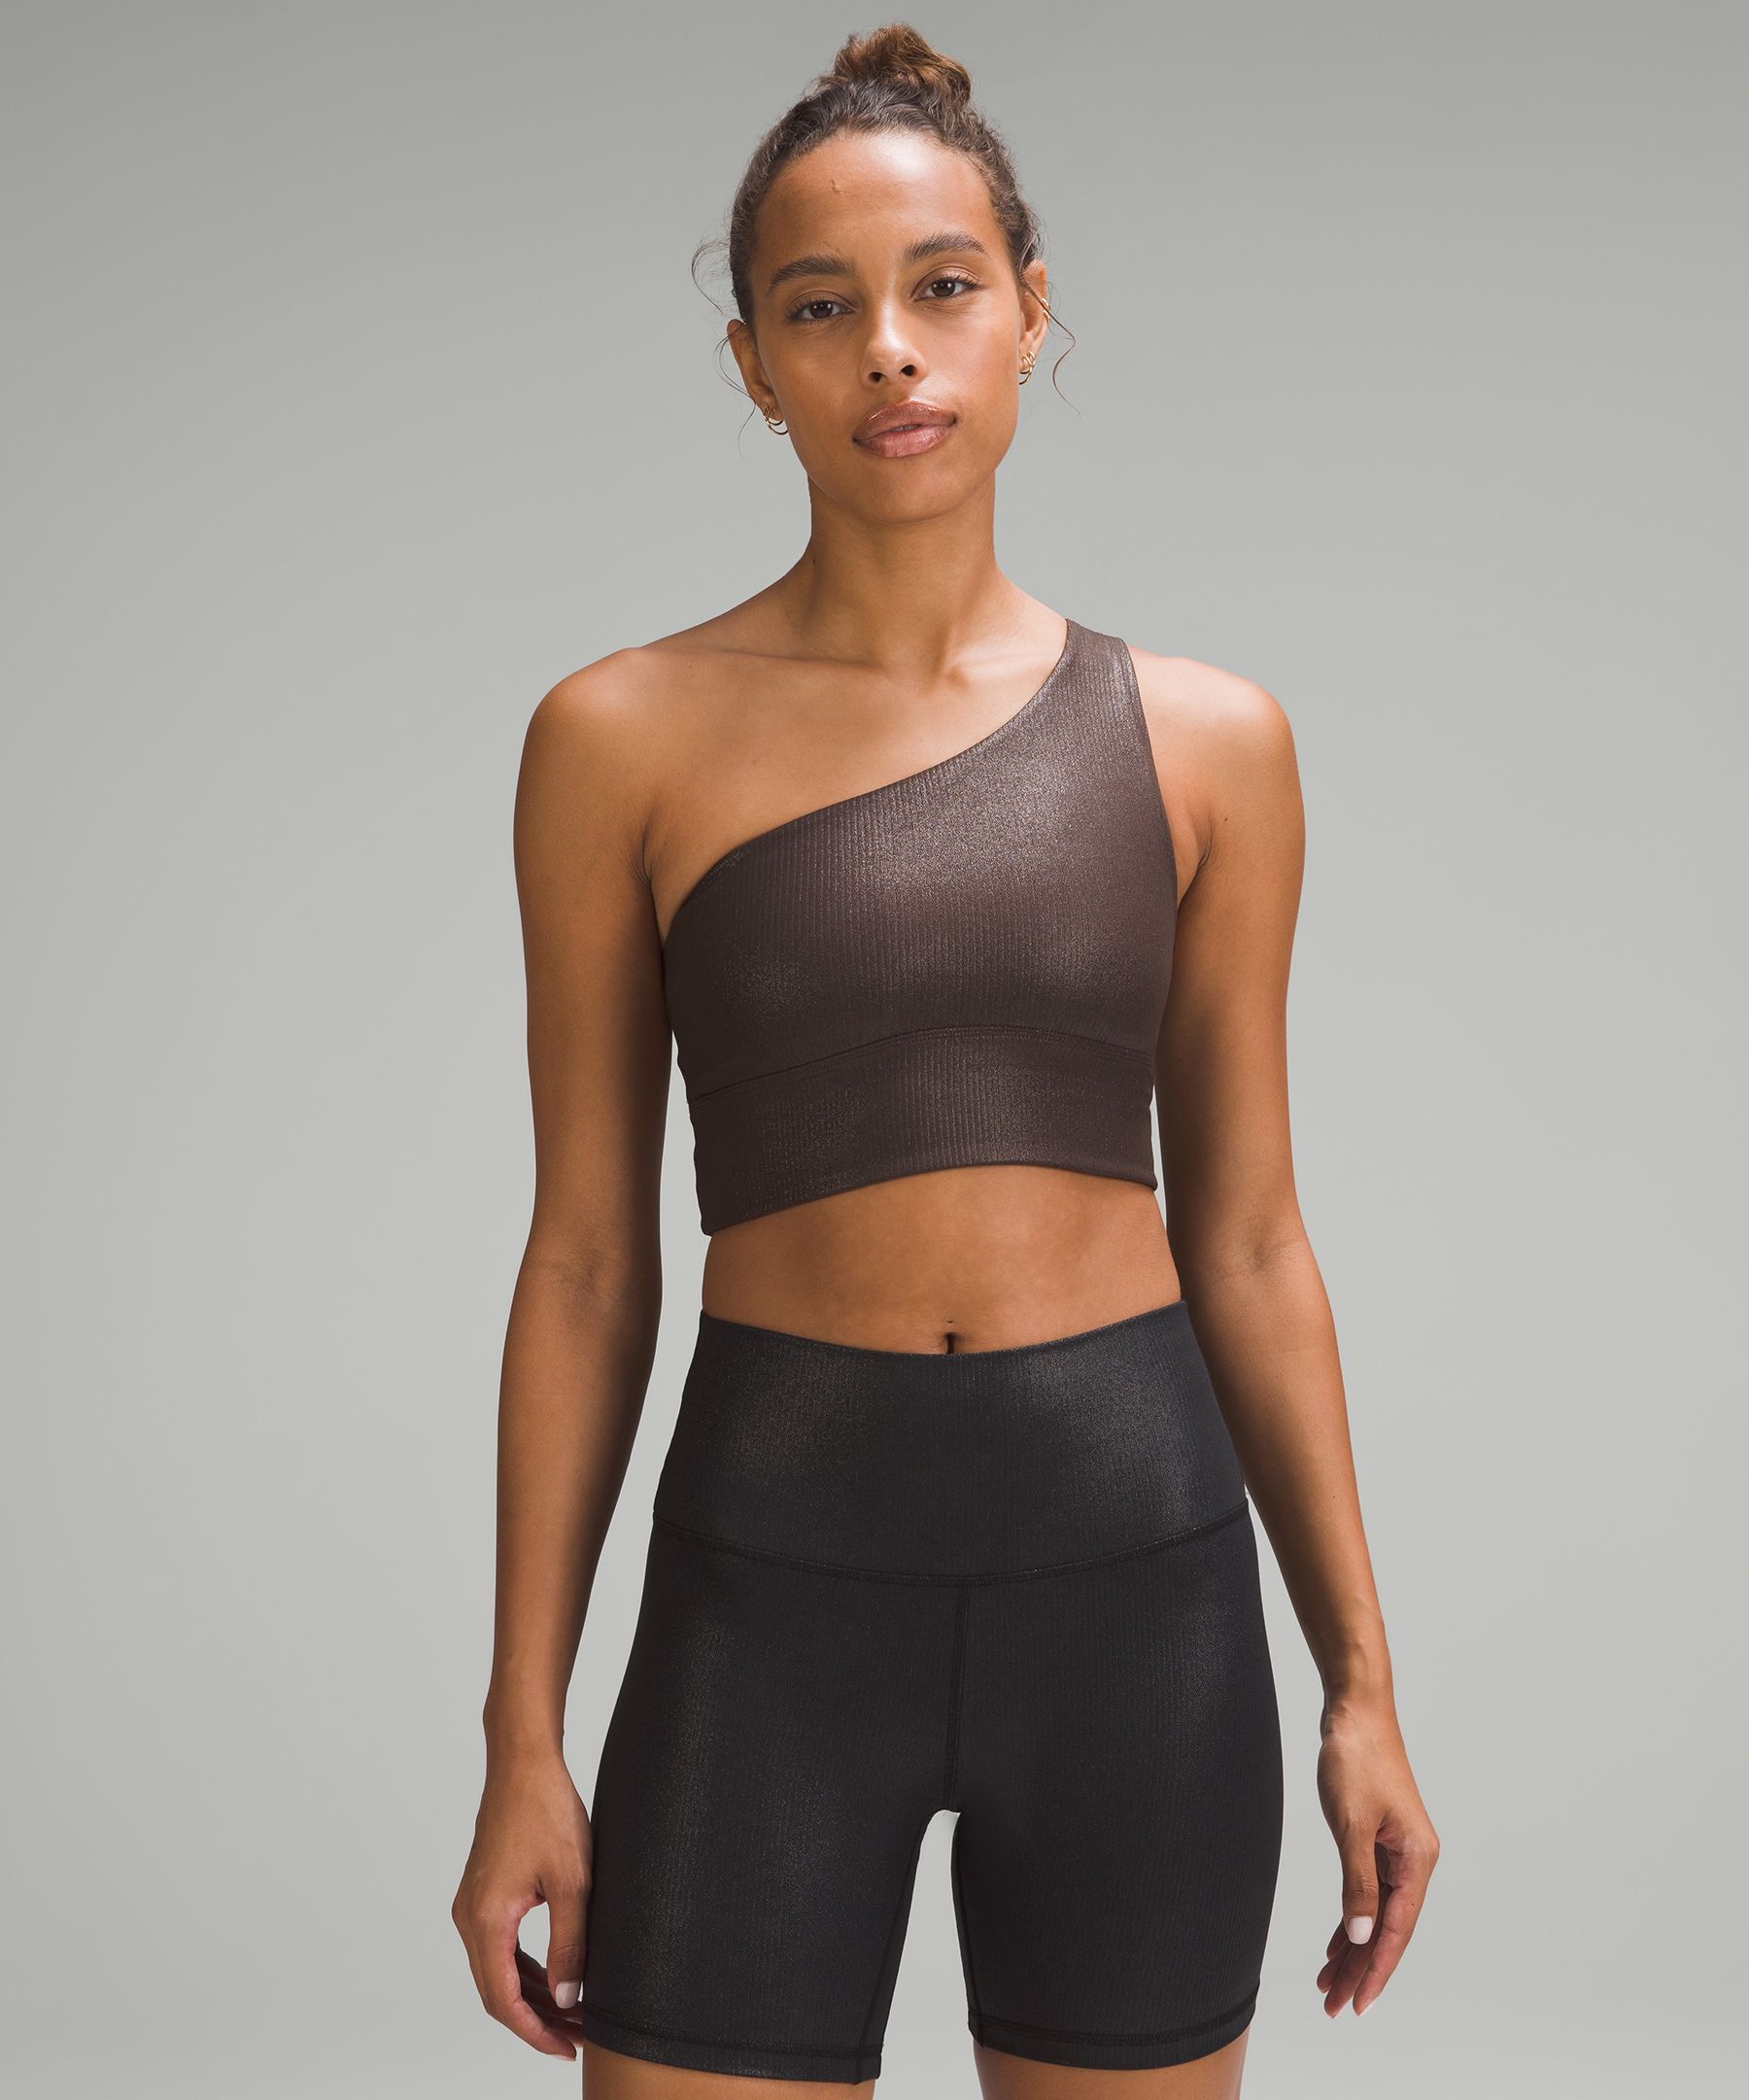 Lululemon Nwt Align Asymmetrical Bra Blue Size M - $55 New With Tags - From  Monique